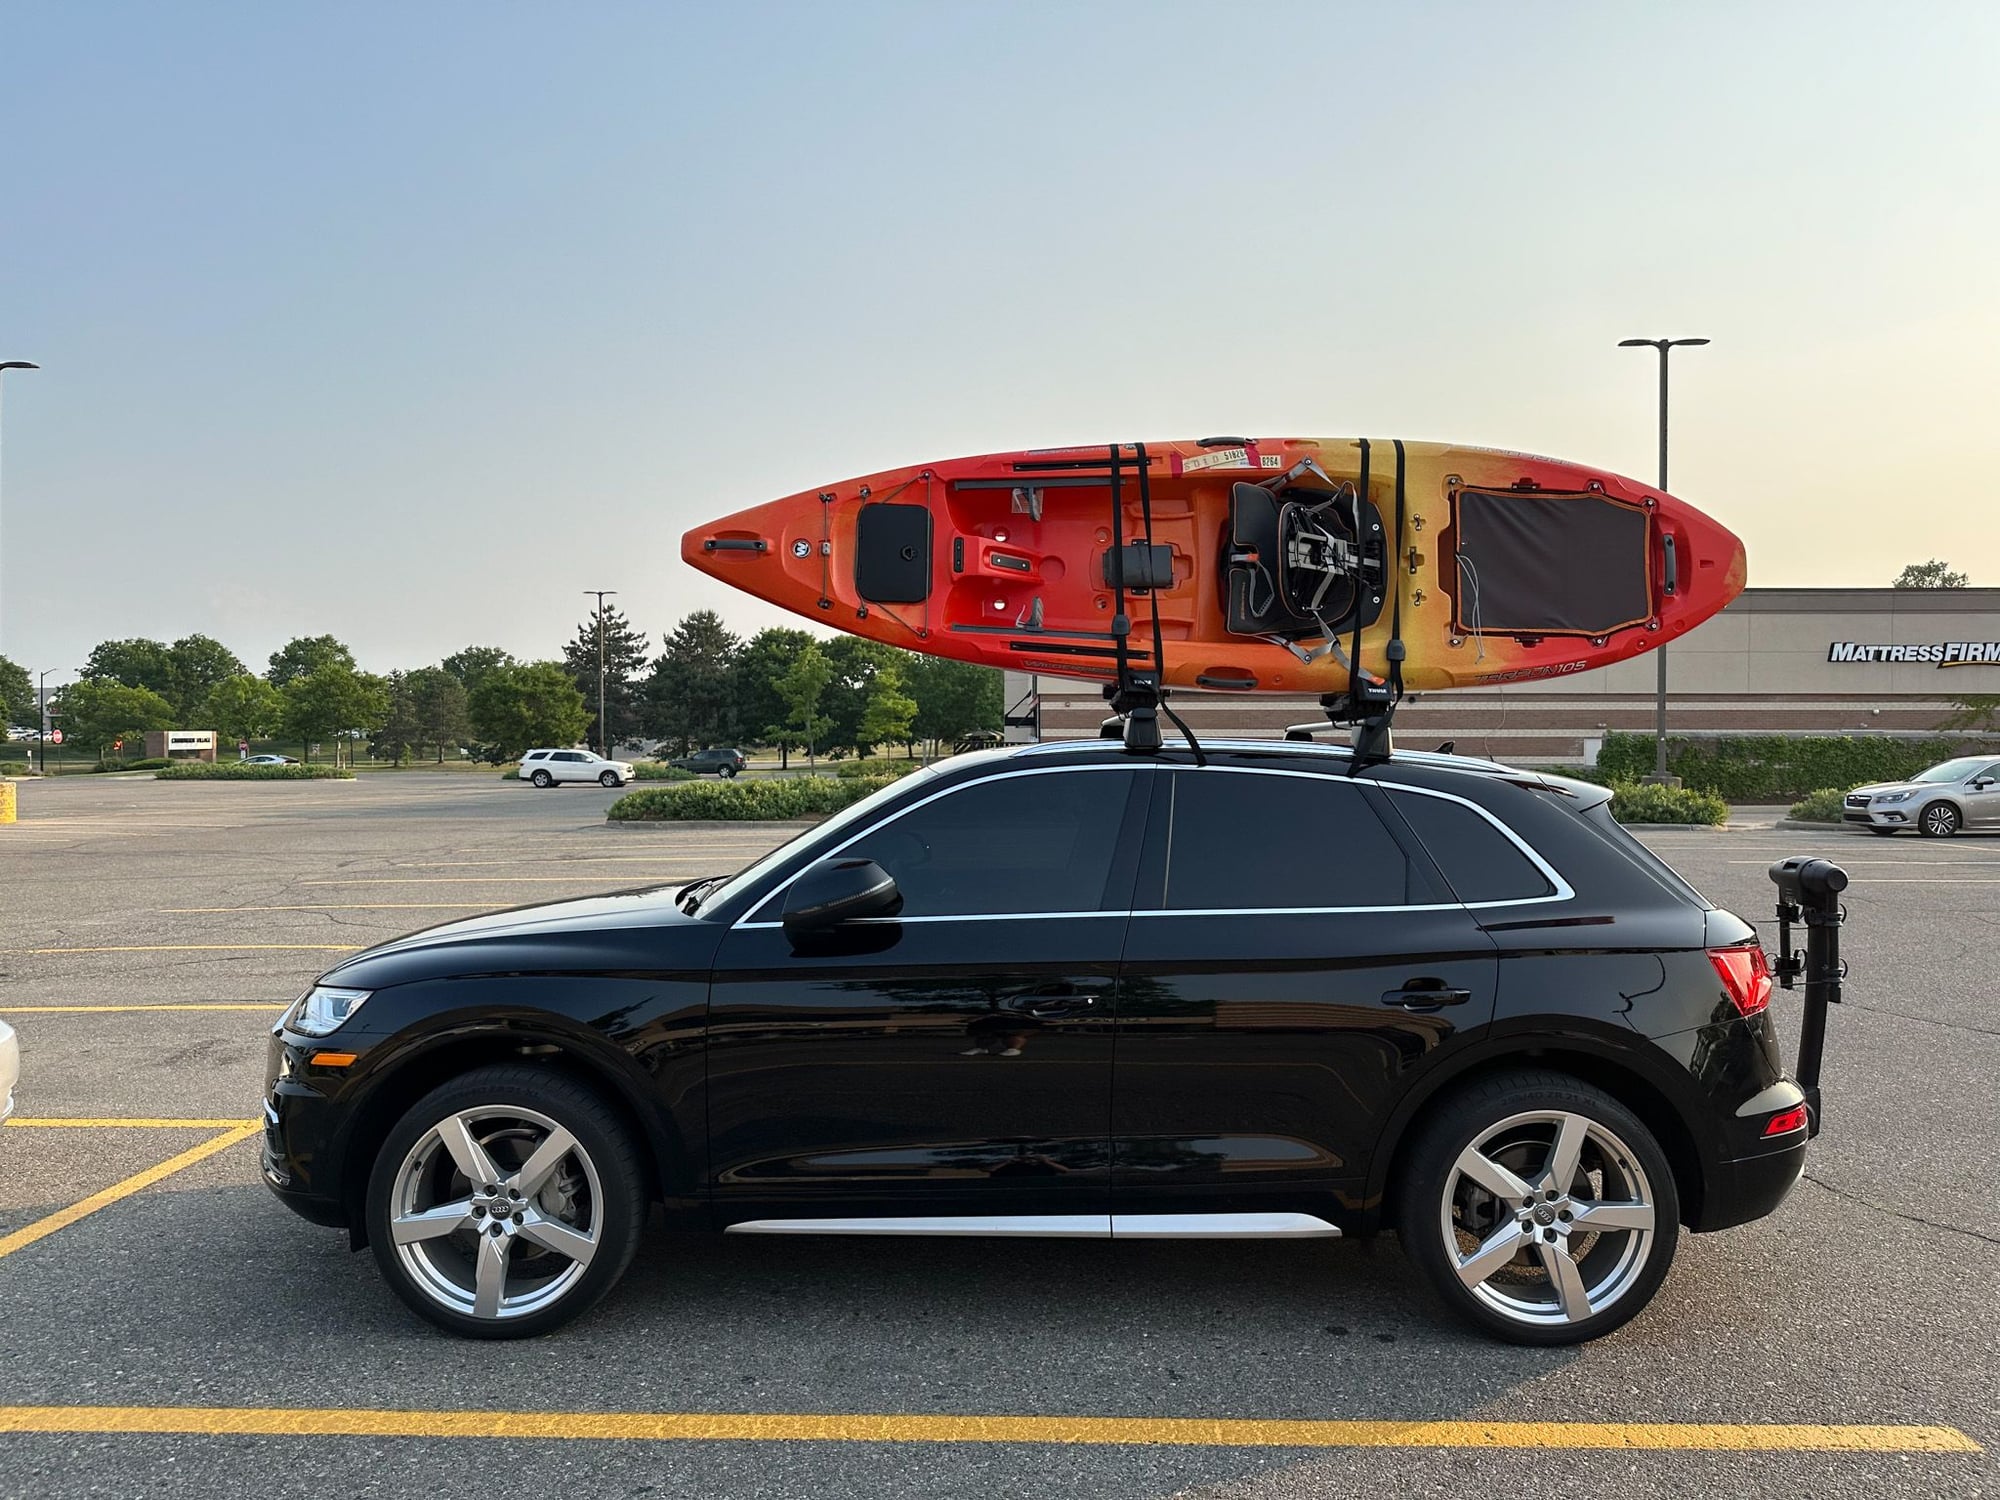 Wheels and Tires/Axles - FS: 21" SQ5 5-arm-polygon design wheels, with summer tires - Used - 2018 to 2024 Audi SQ5 - 2018 to 2024 Audi Q5 - Ann Arbor, MI 48197, United States